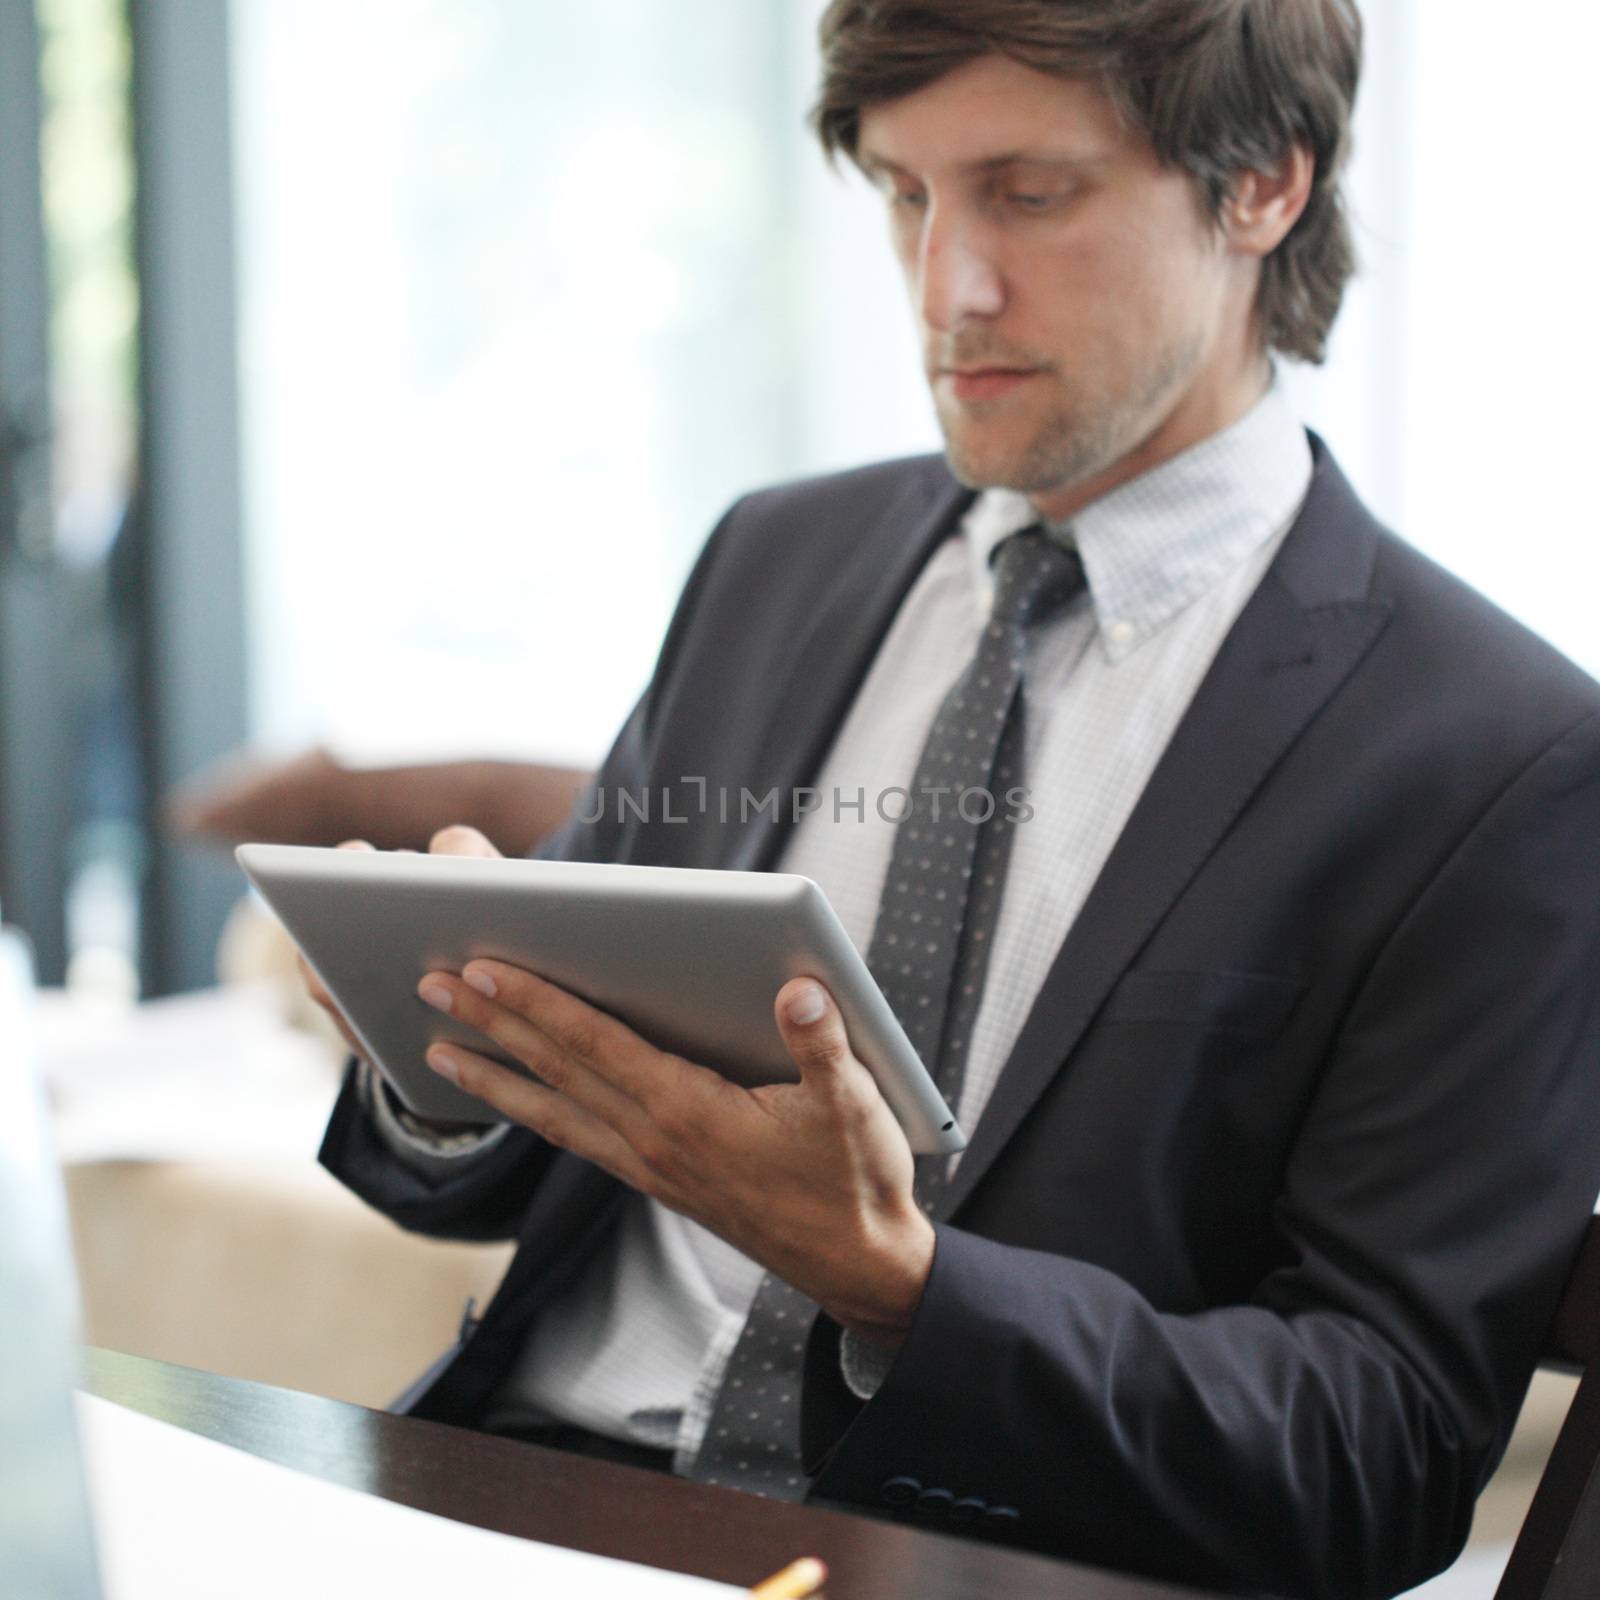 Business man with tablet pc working at office desk